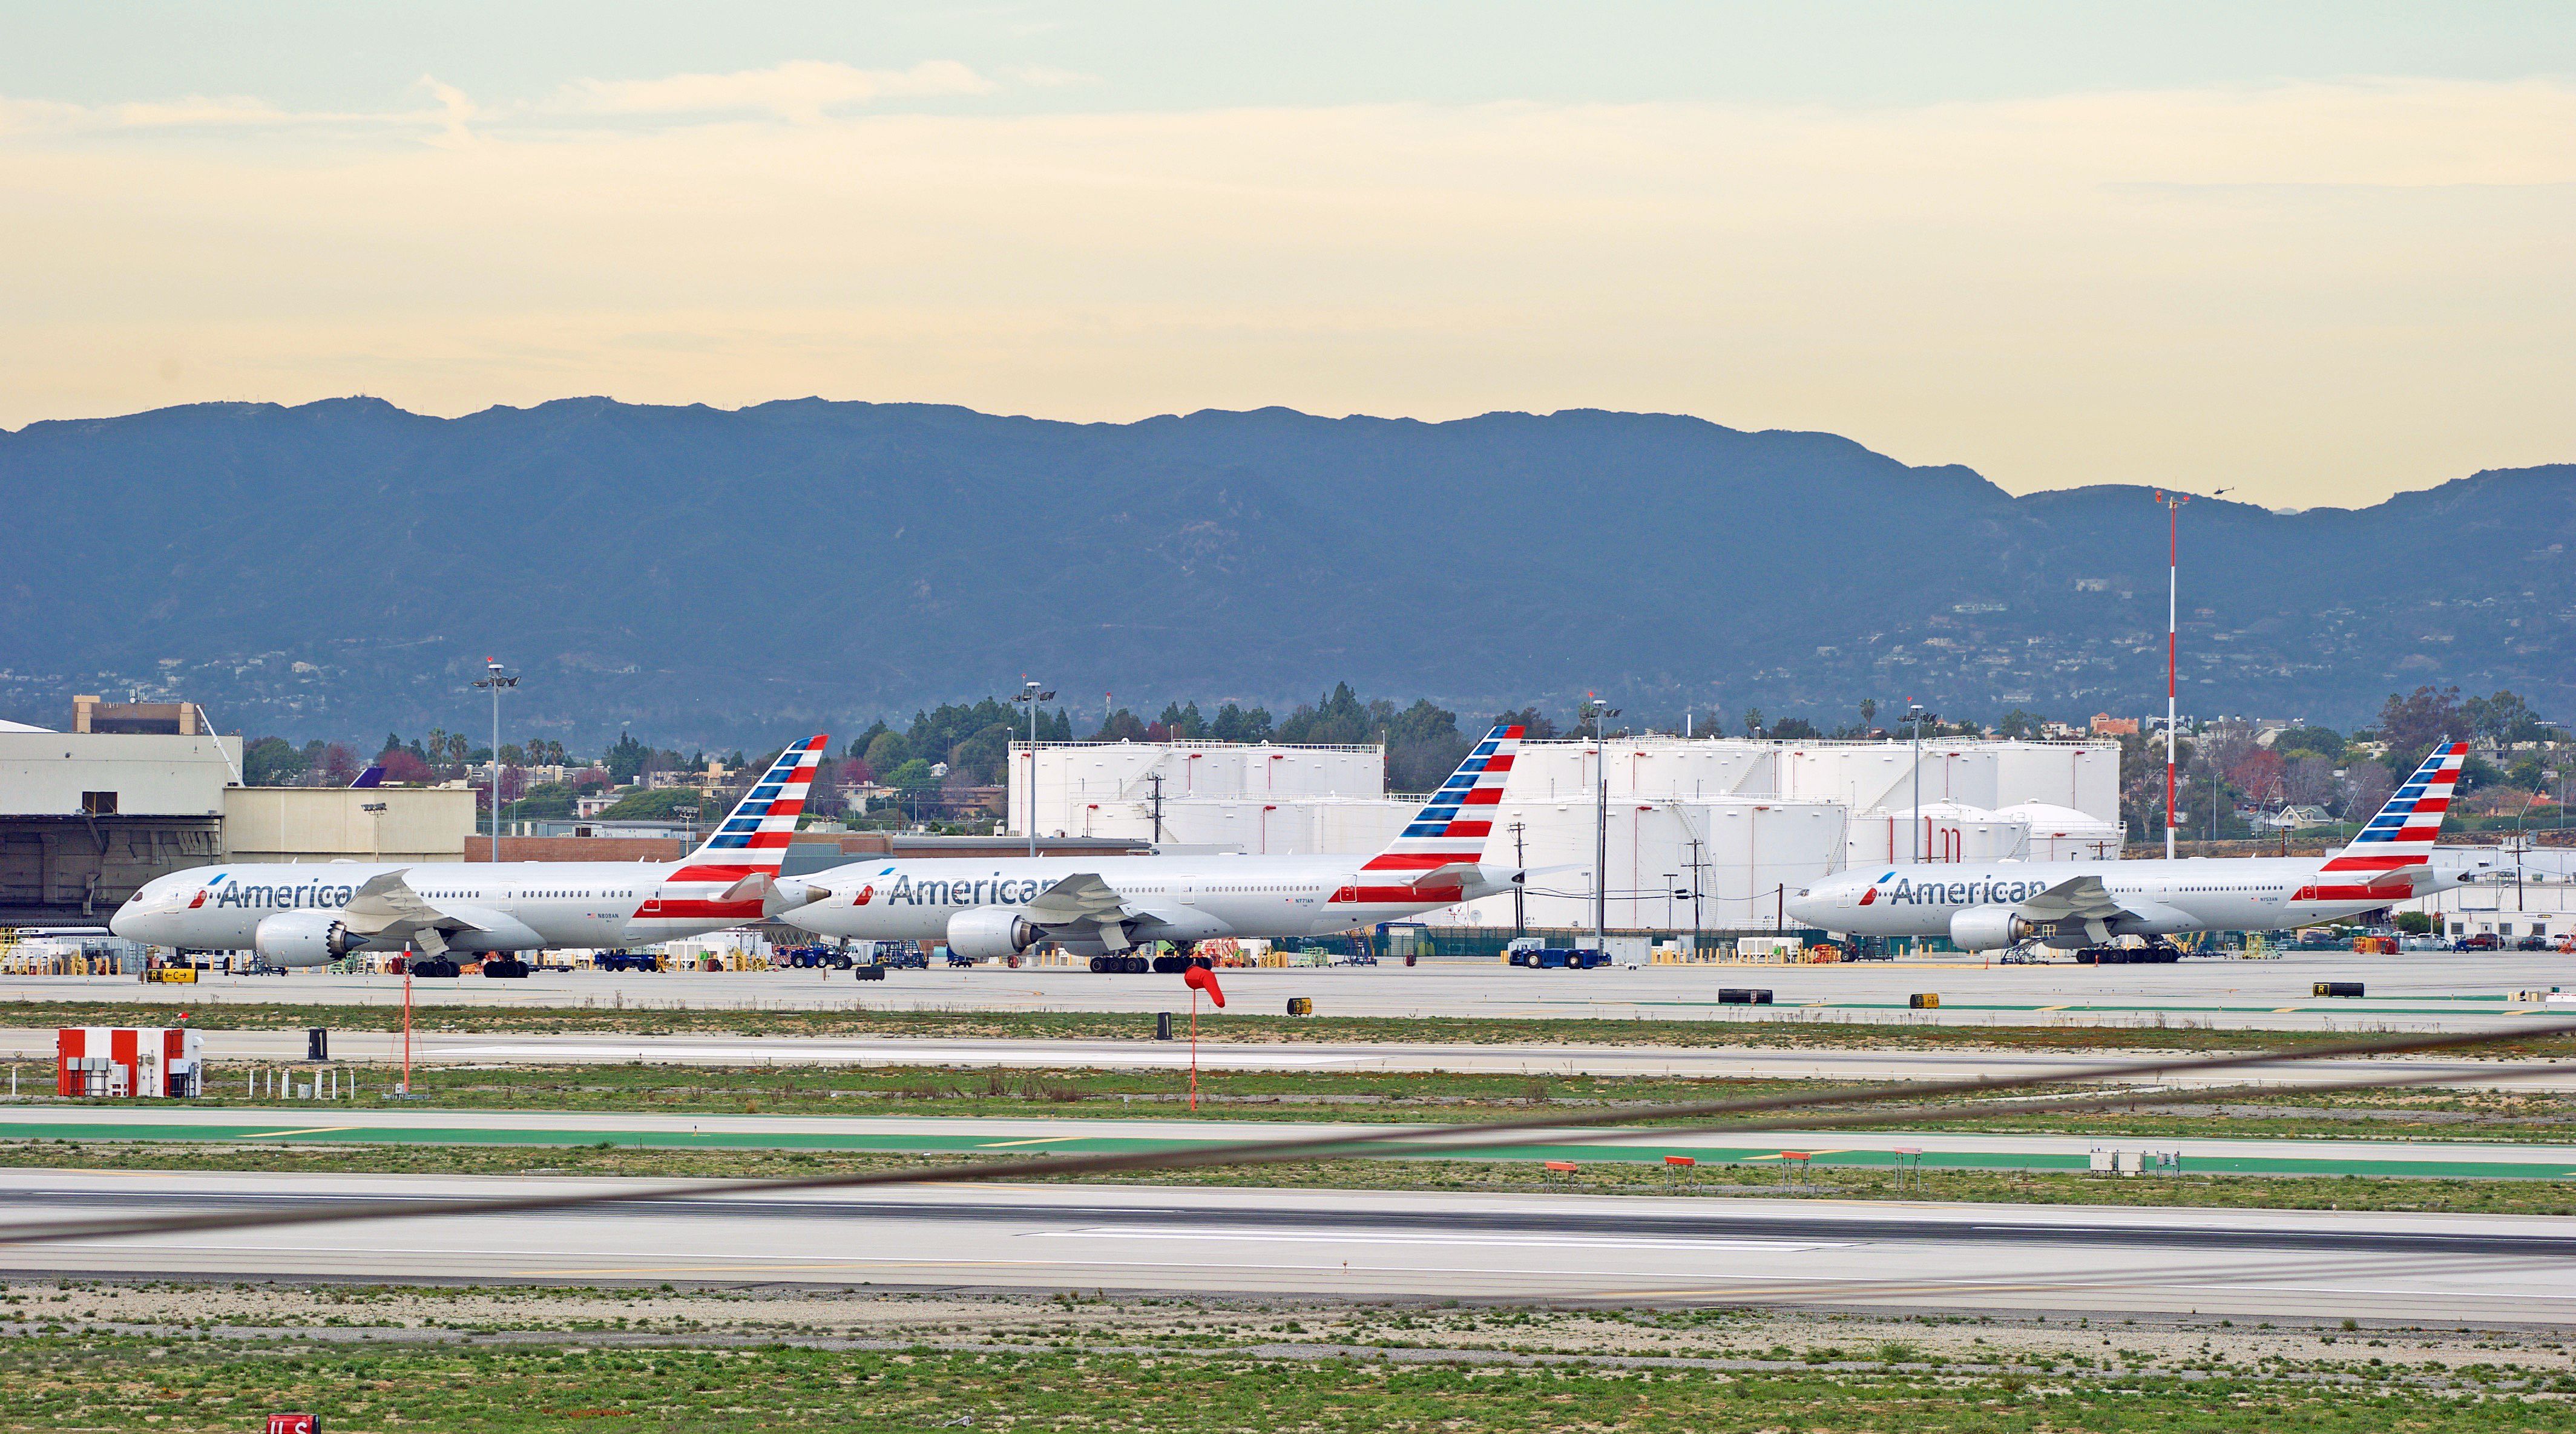 American Airlines Boeing 787 Dreamliner and two Boeing 777 aircraft in a holding pattern at Los Angeles International Airport, Los Angeles, CA